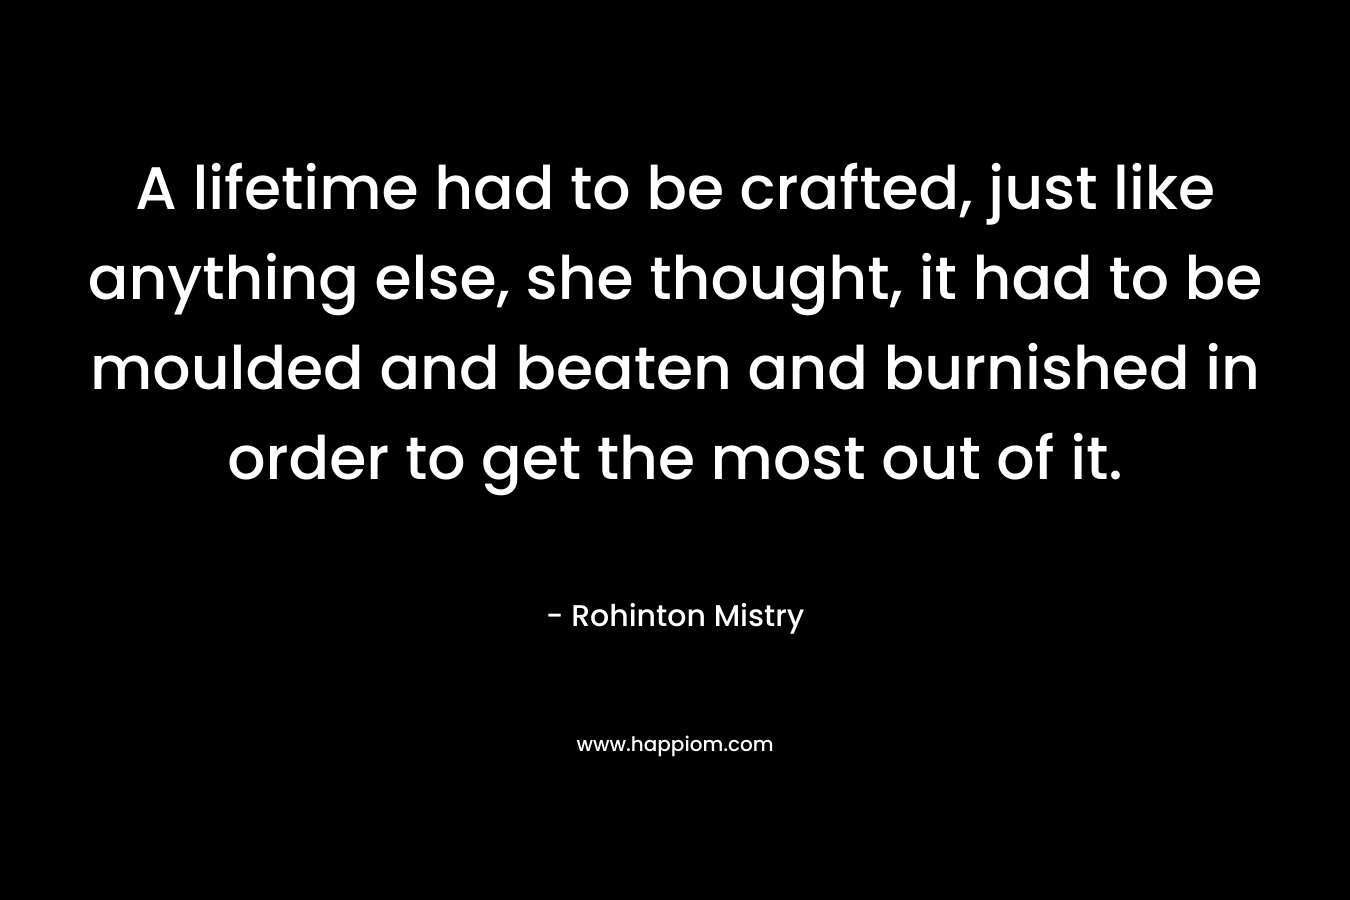 A lifetime had to be crafted, just like anything else, she thought, it had to be moulded and beaten and burnished in order to get the most out of it. – Rohinton Mistry